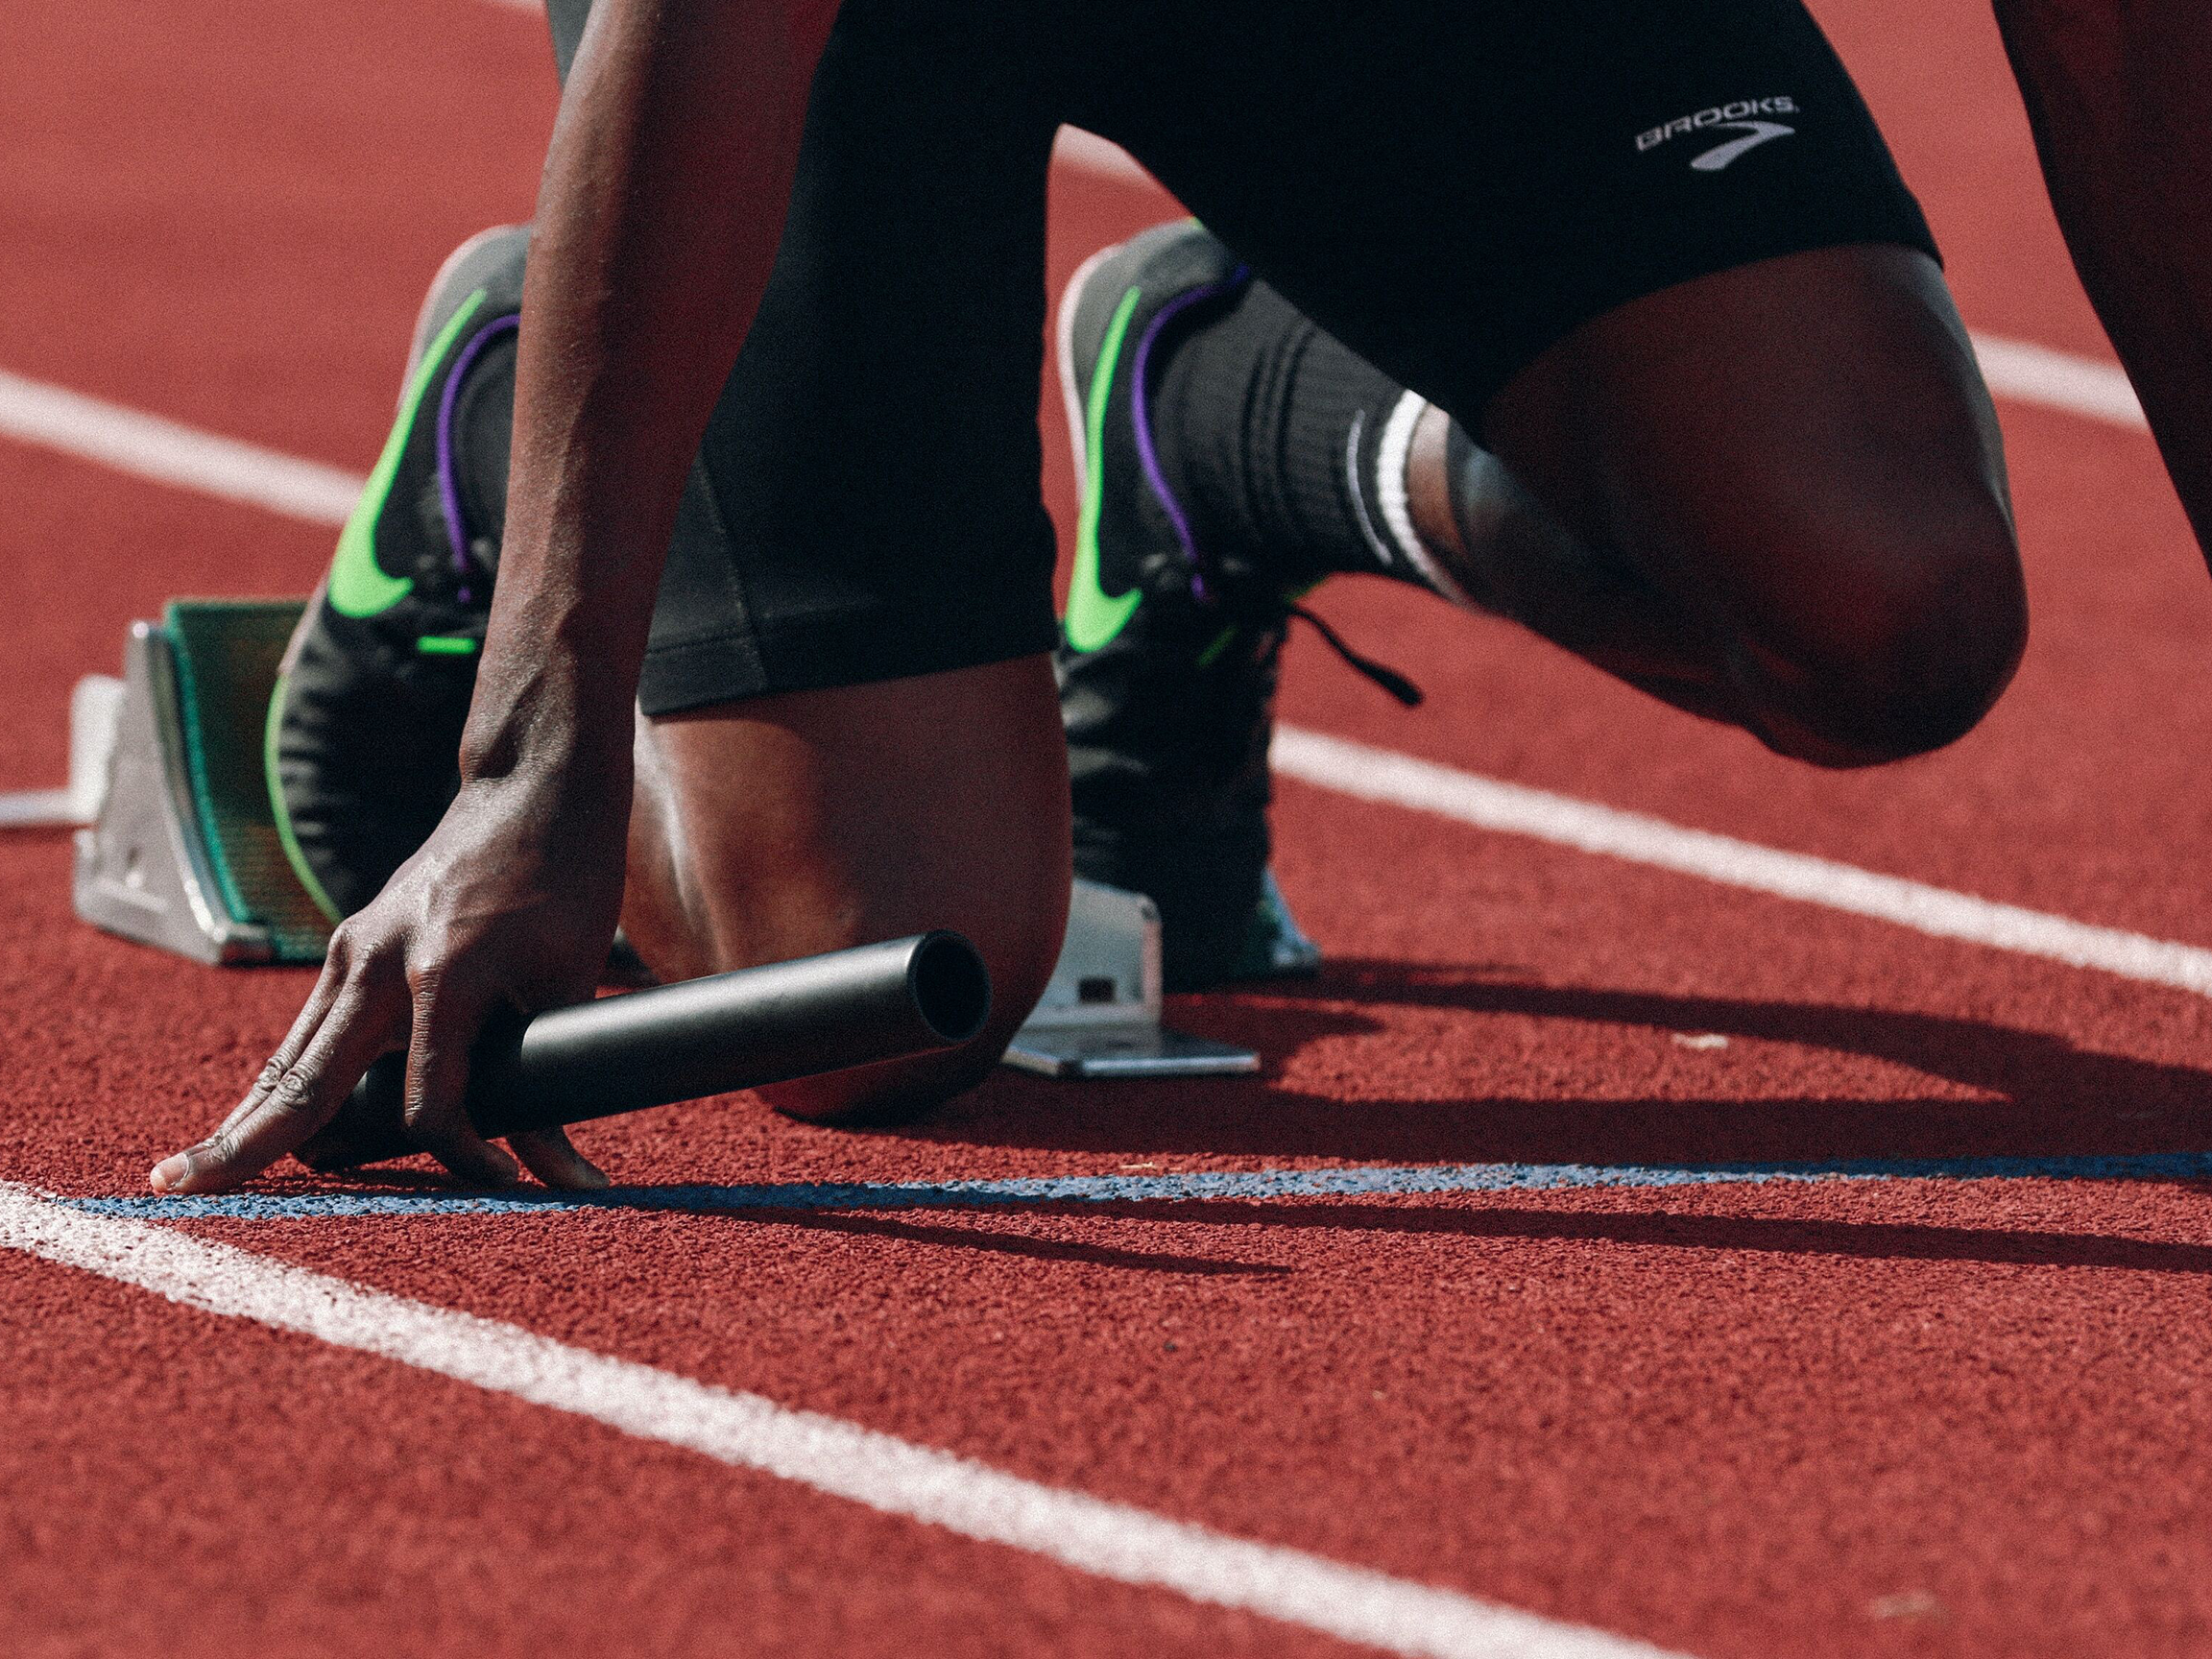 Image of the lower body of a relay runner in starting position on a running track. On the pants you can see the brand Brooks.